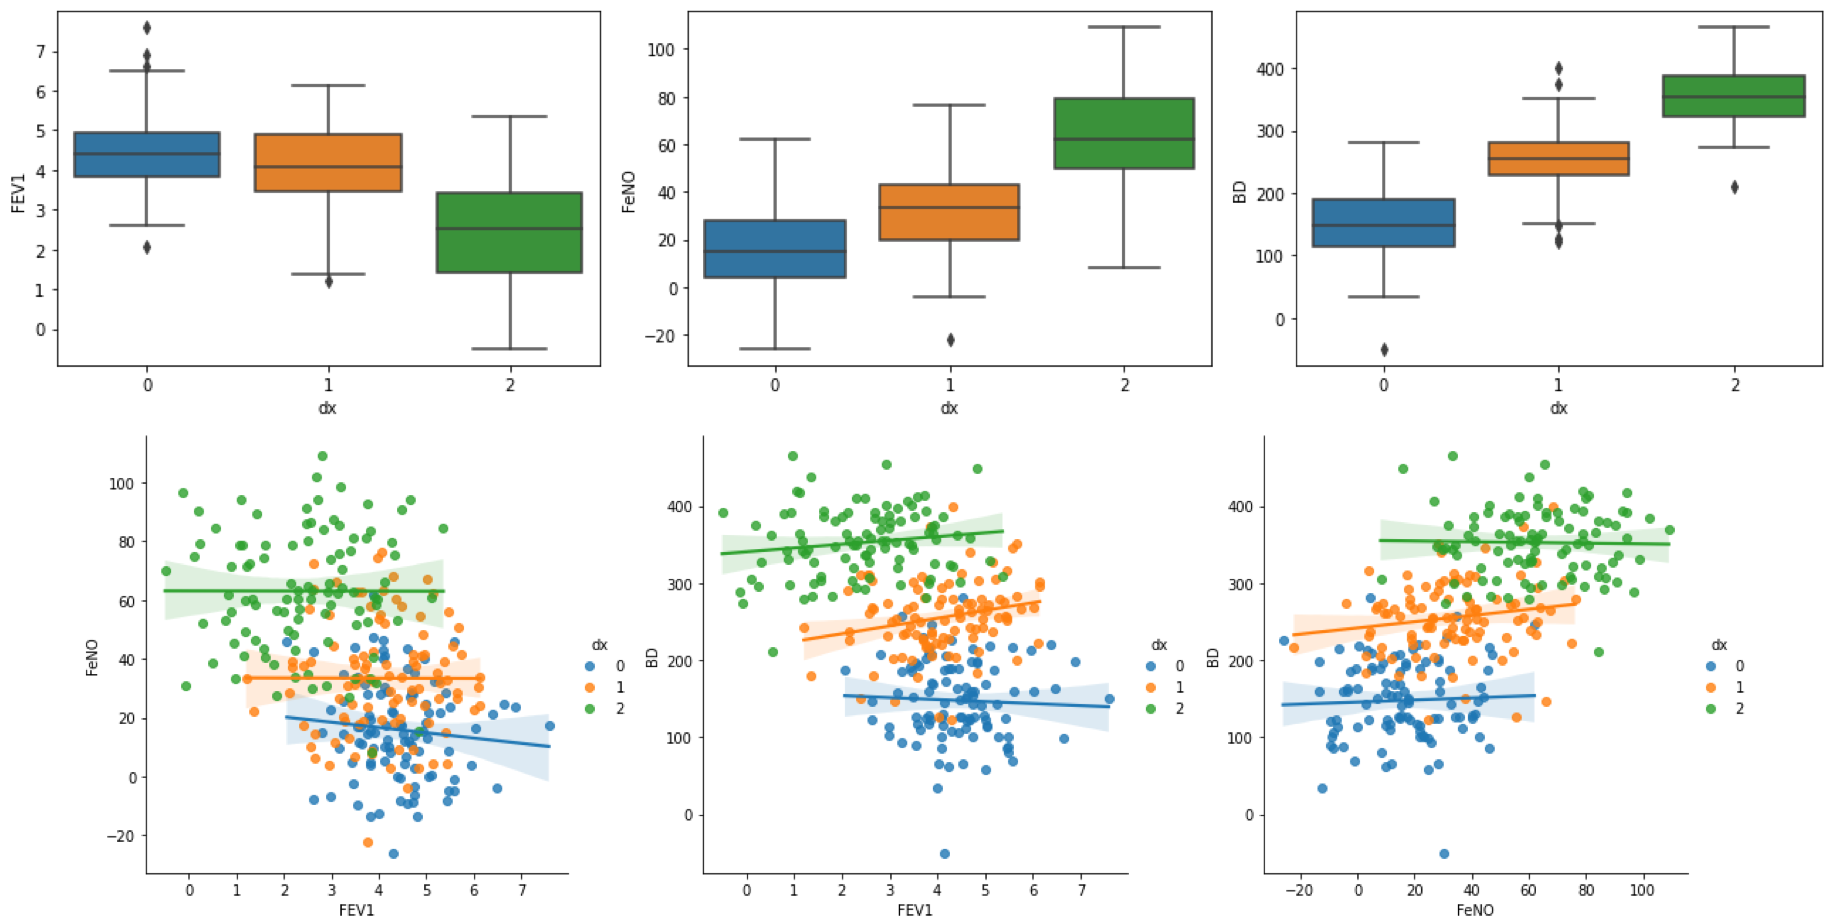 Logistic Regression for Multi-Class Classification: Hands-On with SciKit-Learn